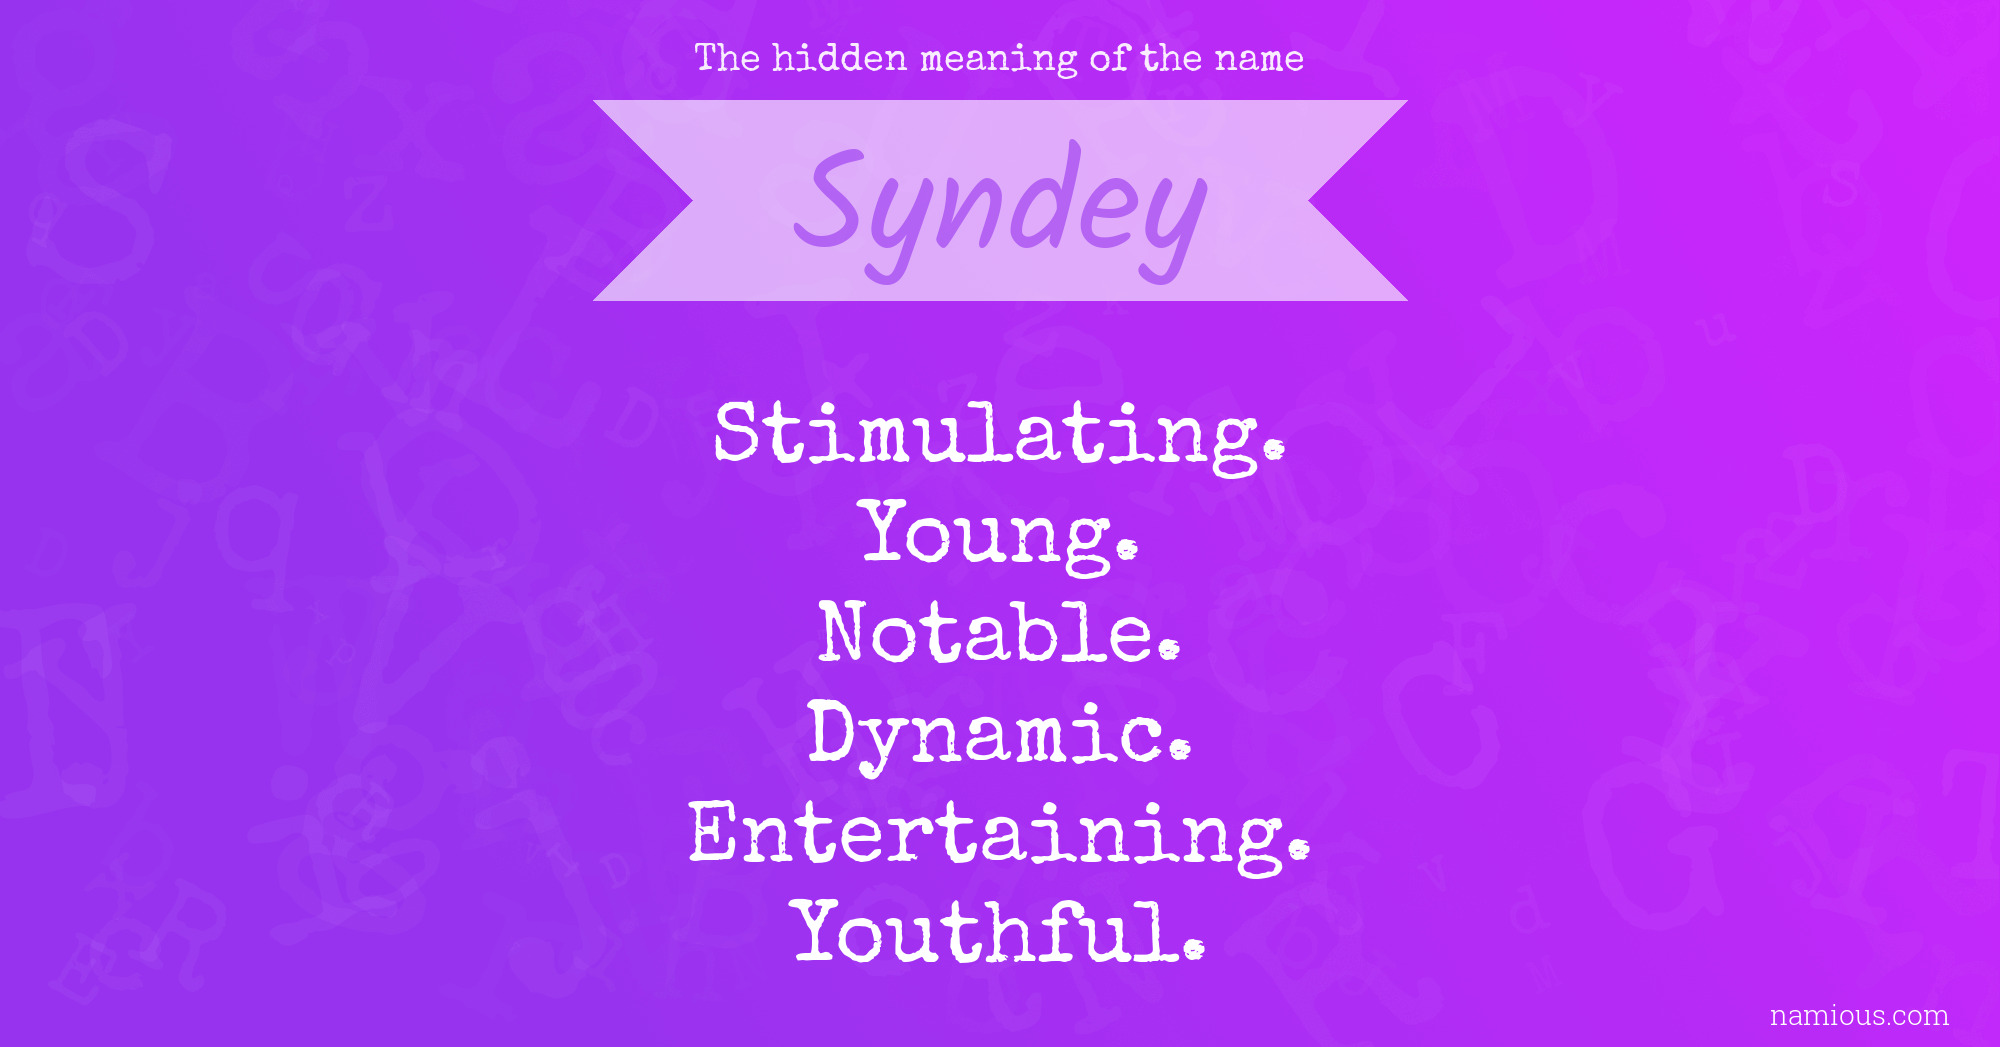 The hidden meaning of the name Syndey